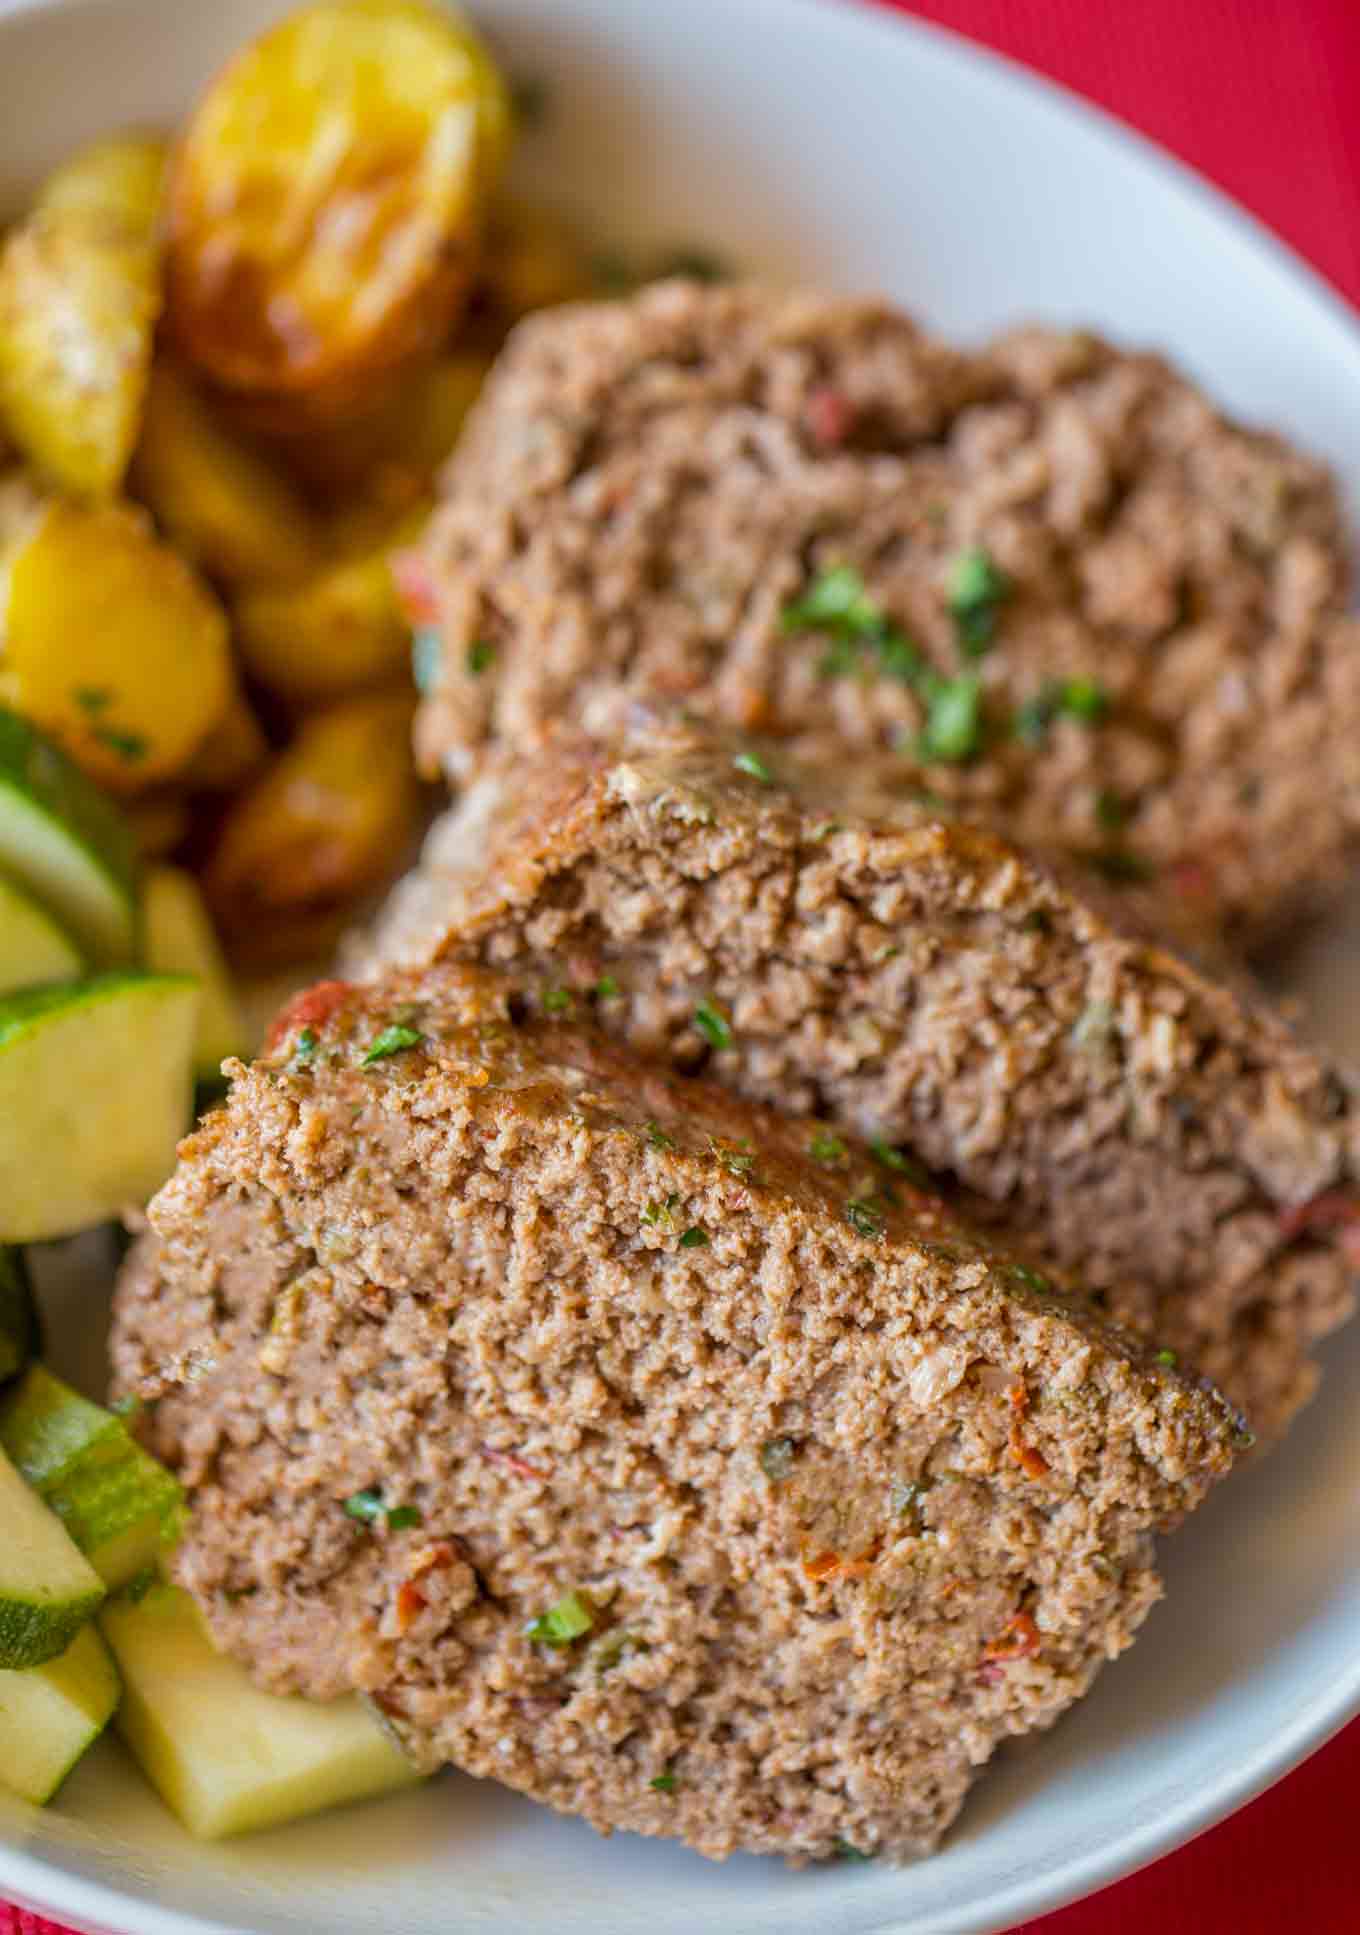 Low Fat Meatloaf : 10 Best Low Fat Low Carb Meatloaf Recipes Yummly / When you require amazing concepts for this recipes, look no more than this list of 20 finest recipes to feed a group.